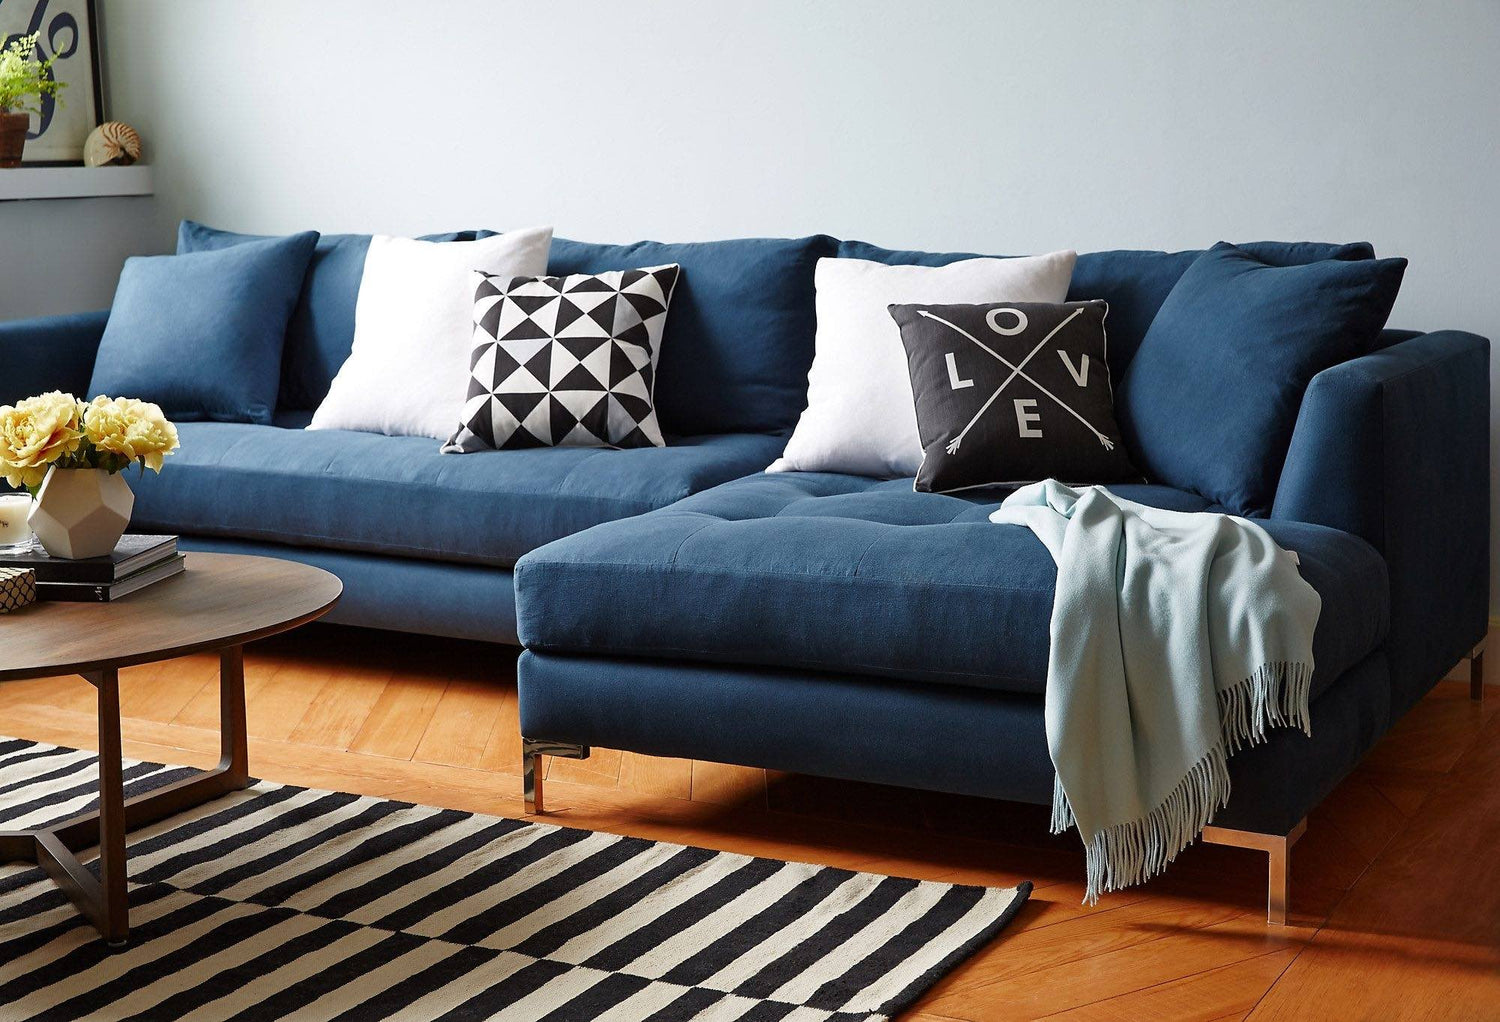 A modern living room with a blue sectional sofa adorned with decorative pillows, including a geometric design and one with the word "LOVE". A light blue throw blanket is draped over the sofa. The room features a wooden floor, round coffee table, and a black-and-white striped rug.